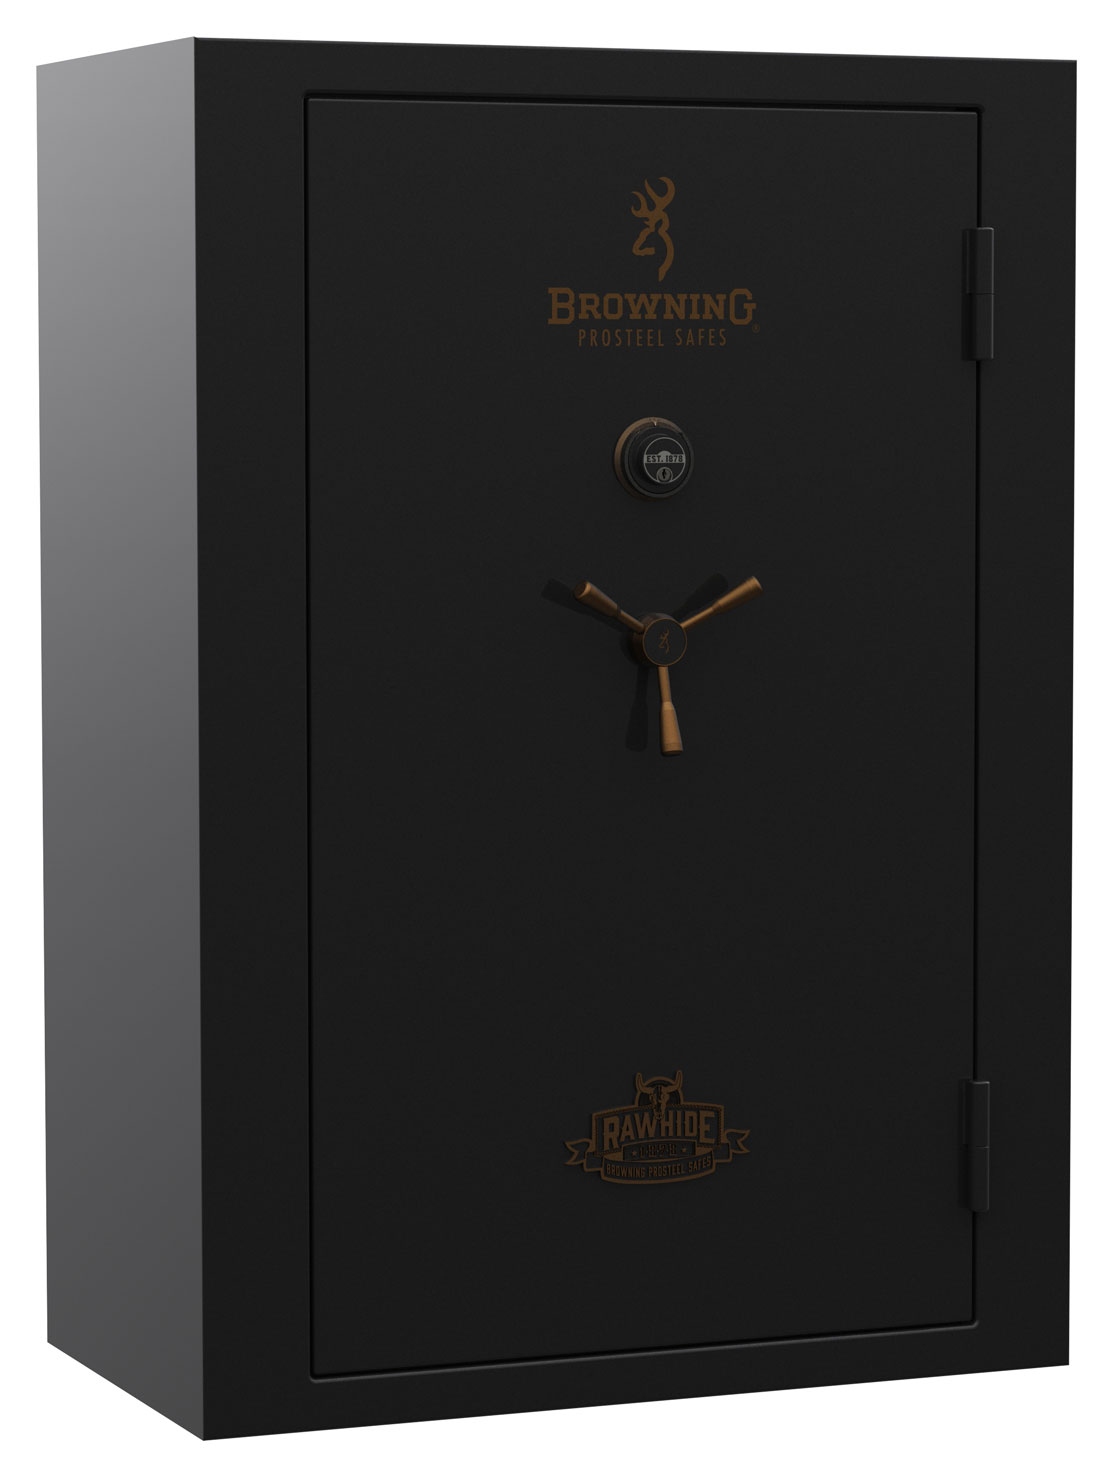 how to break into a browning prosteel safe